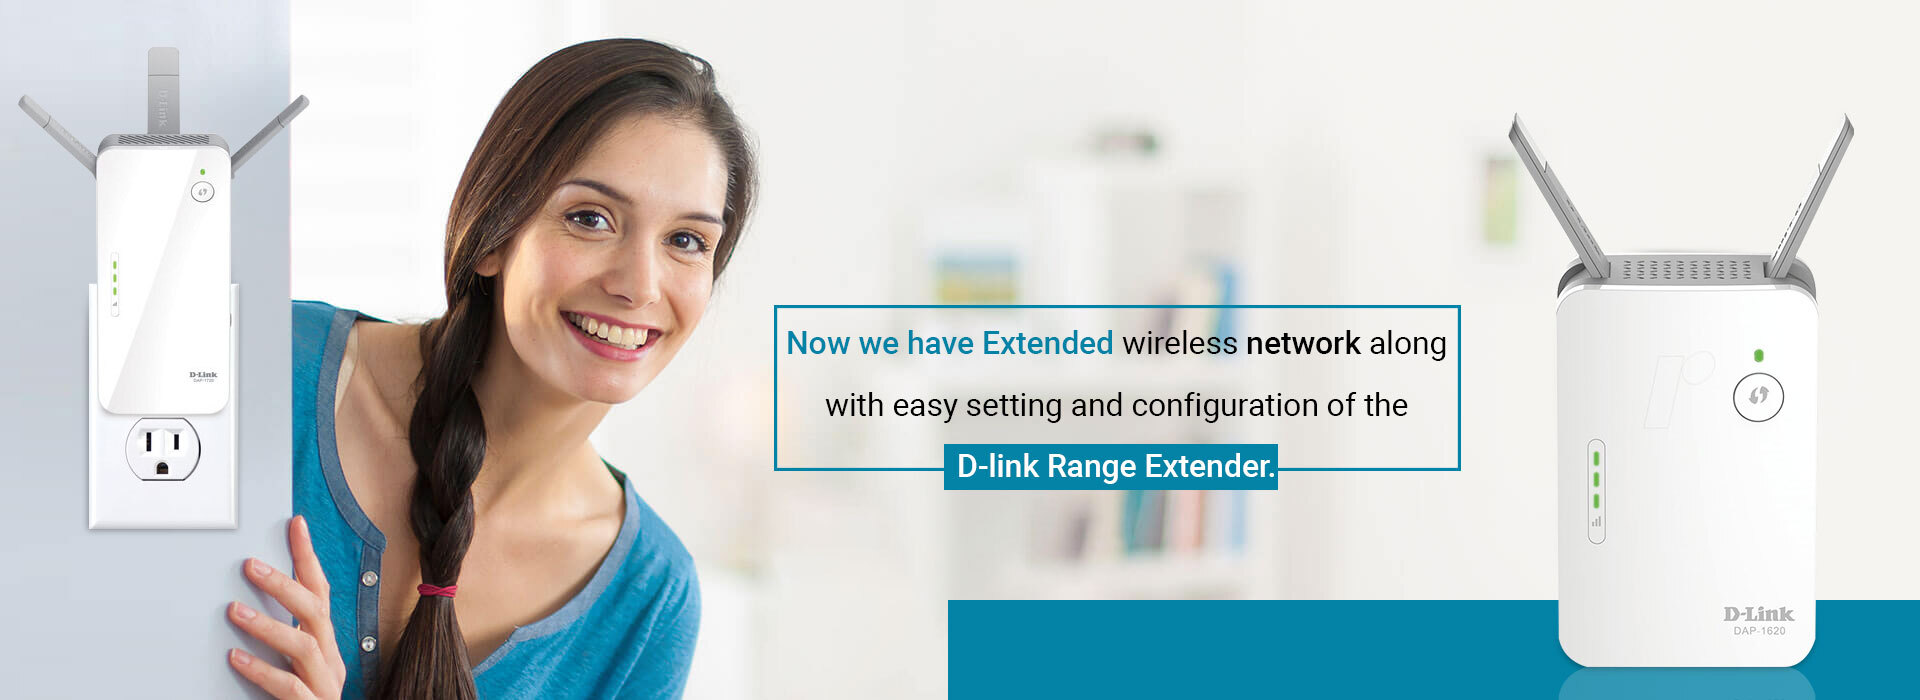 How to log into my D-Link WiFi extender - Quora